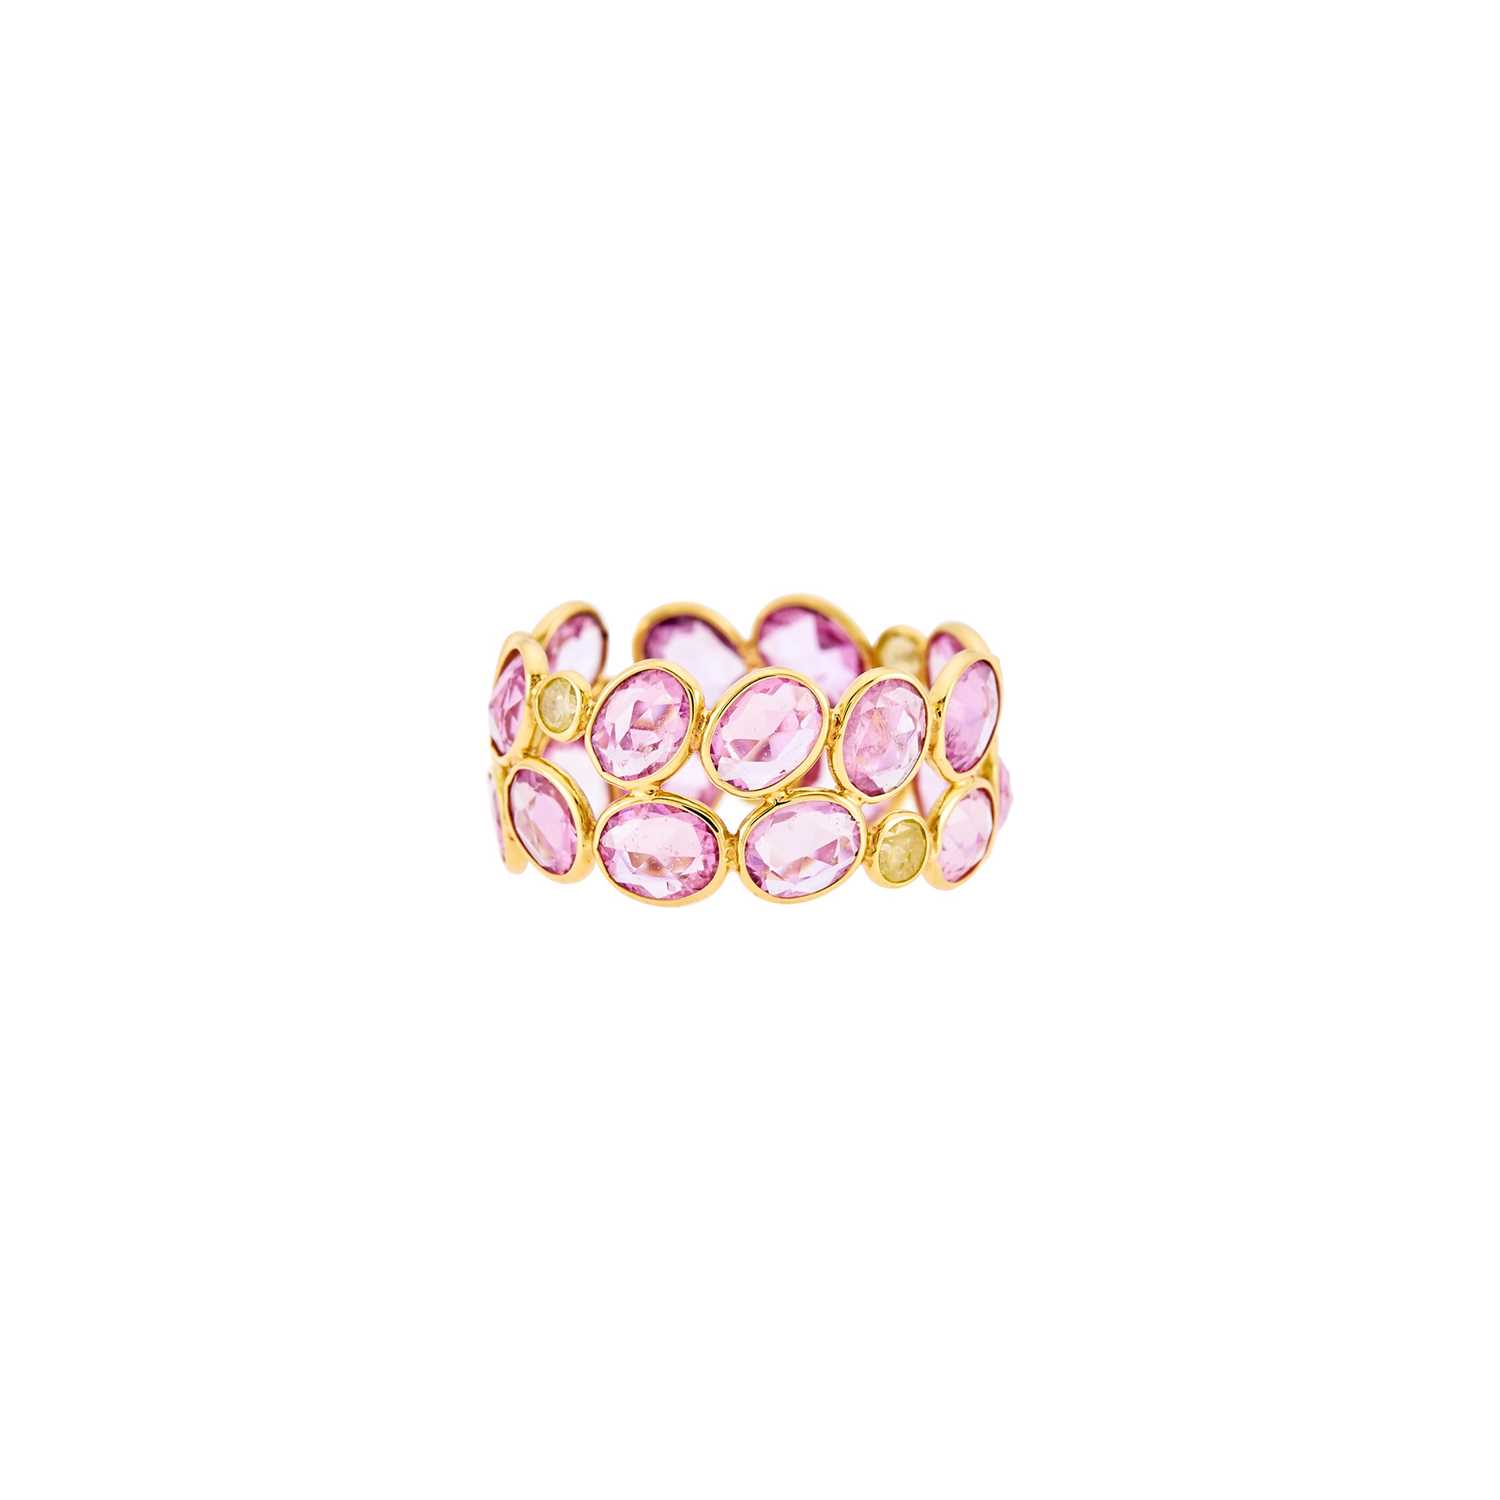 Lot 1281 - Gold, Pink Sapphire and Colored Diamond Band Ring